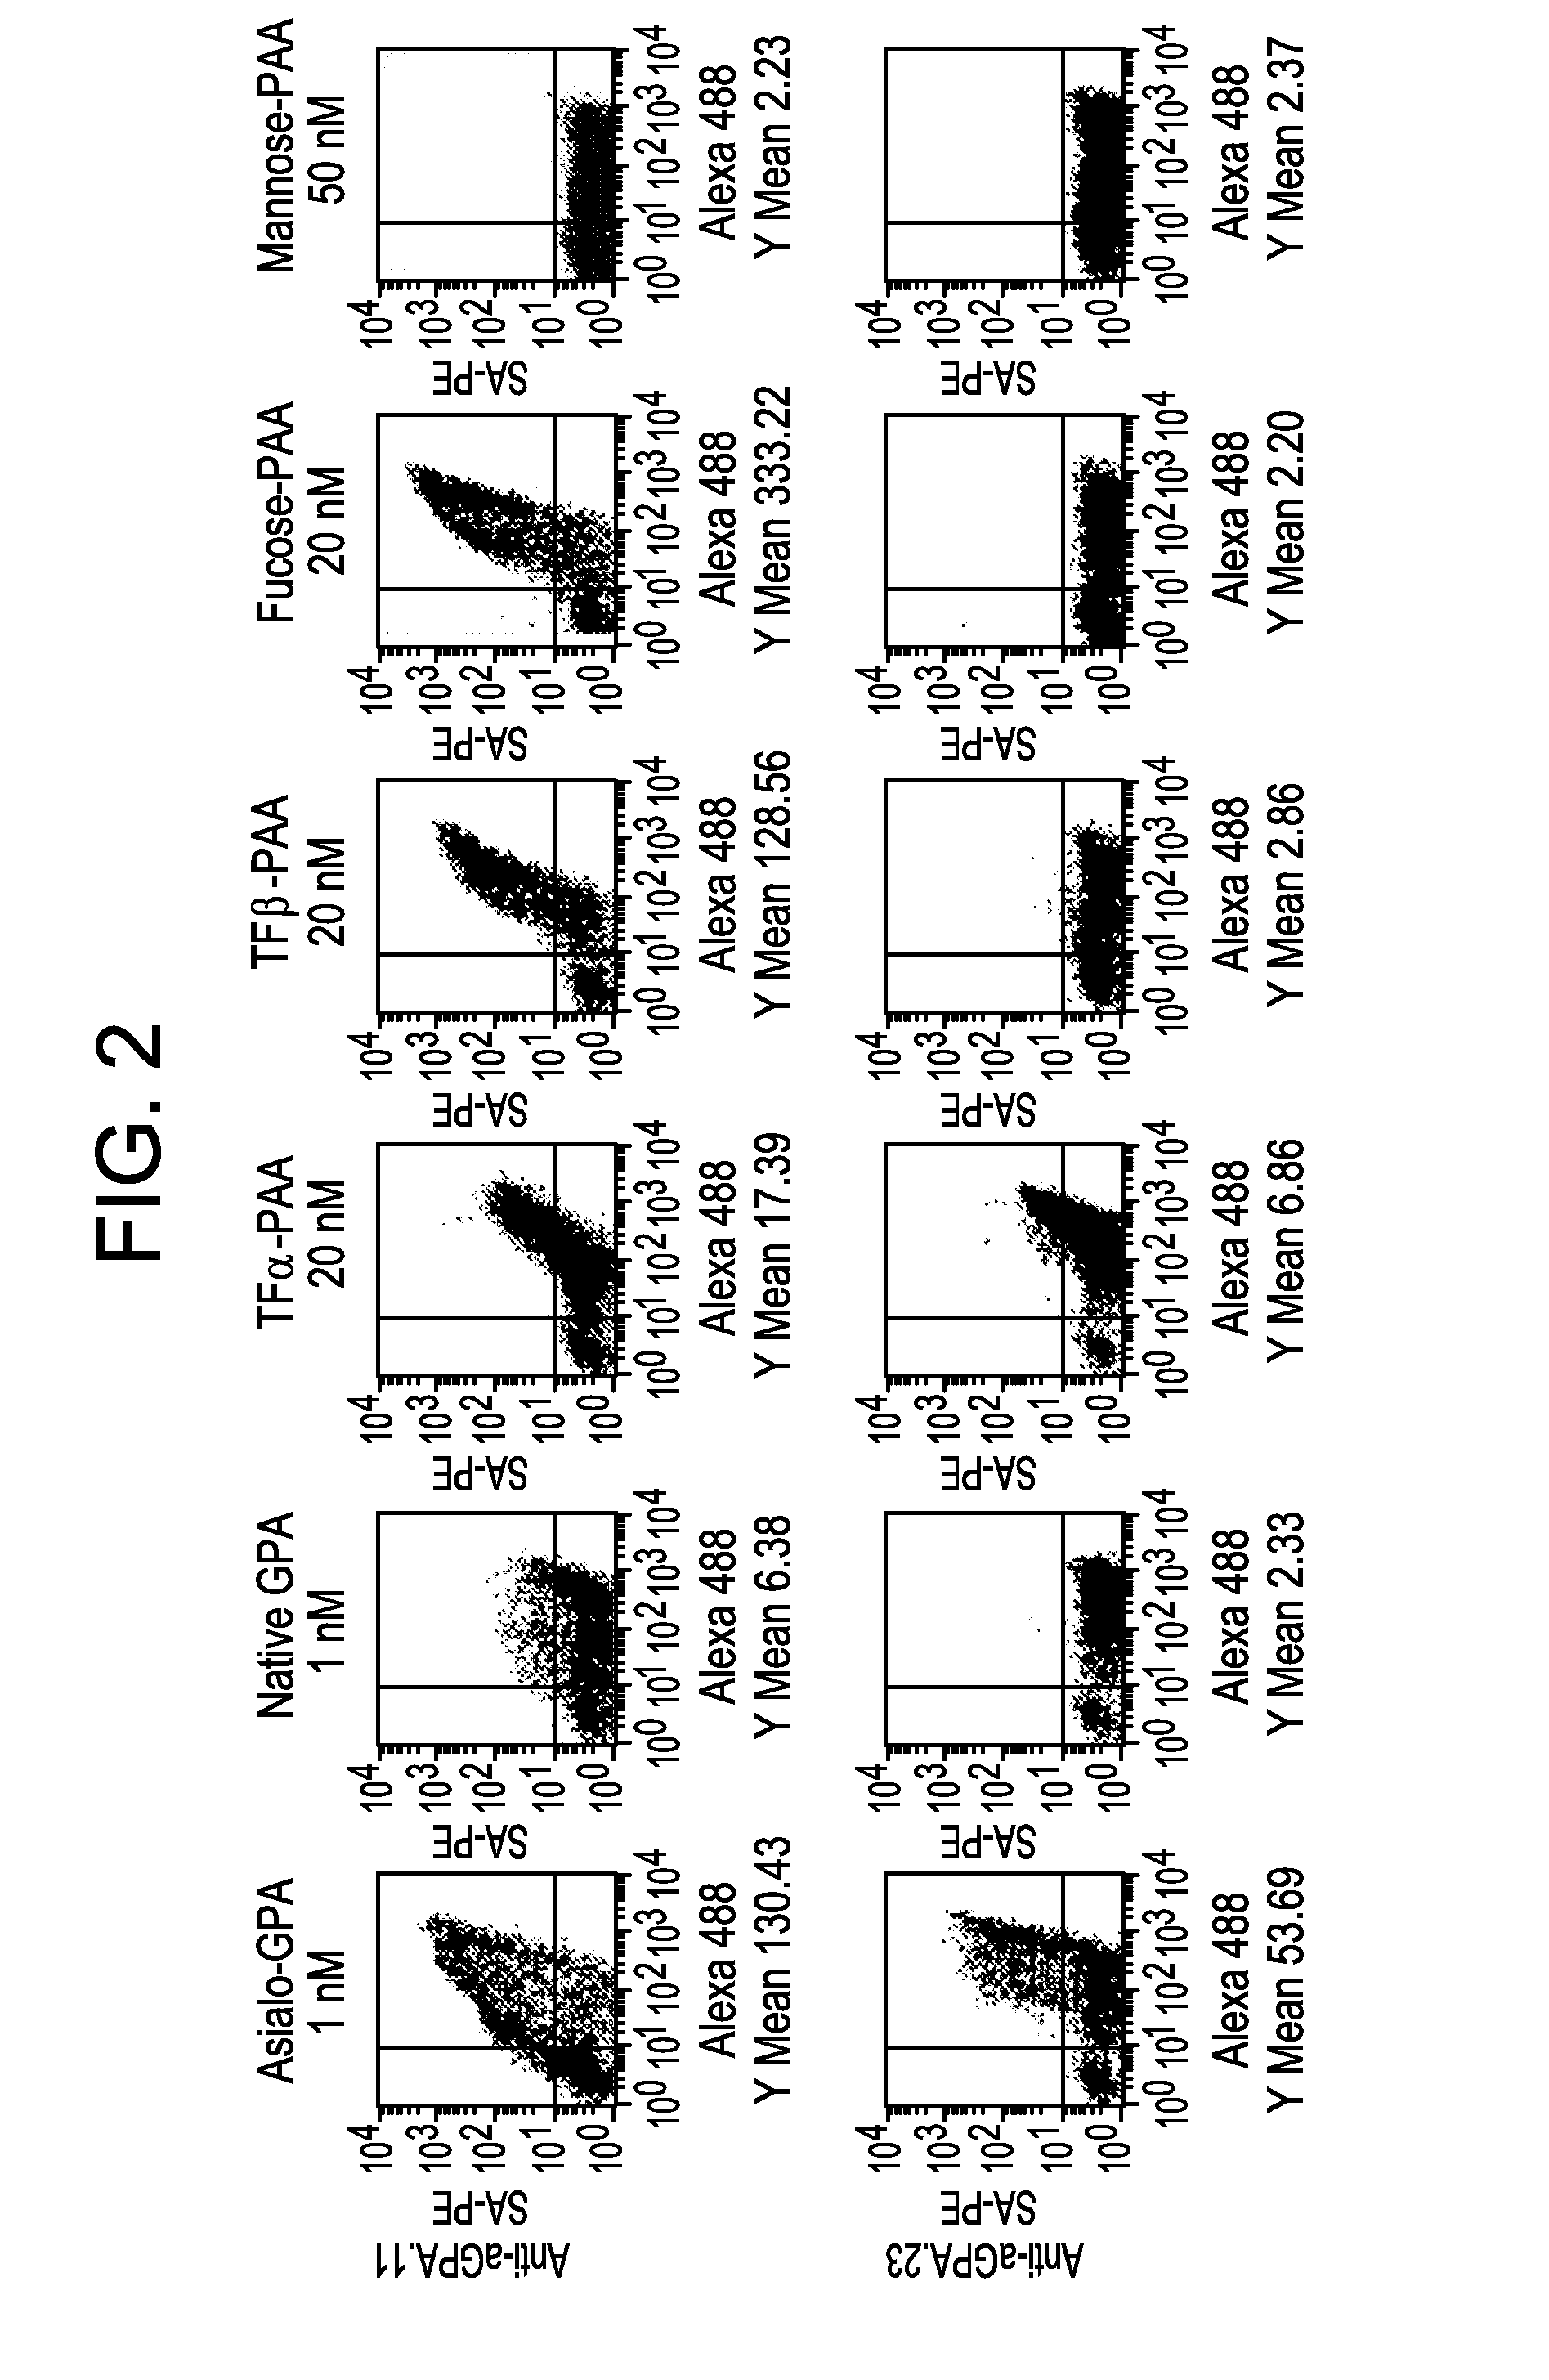 Lambodies with high affinity and selectivity for glycans and uses therefor